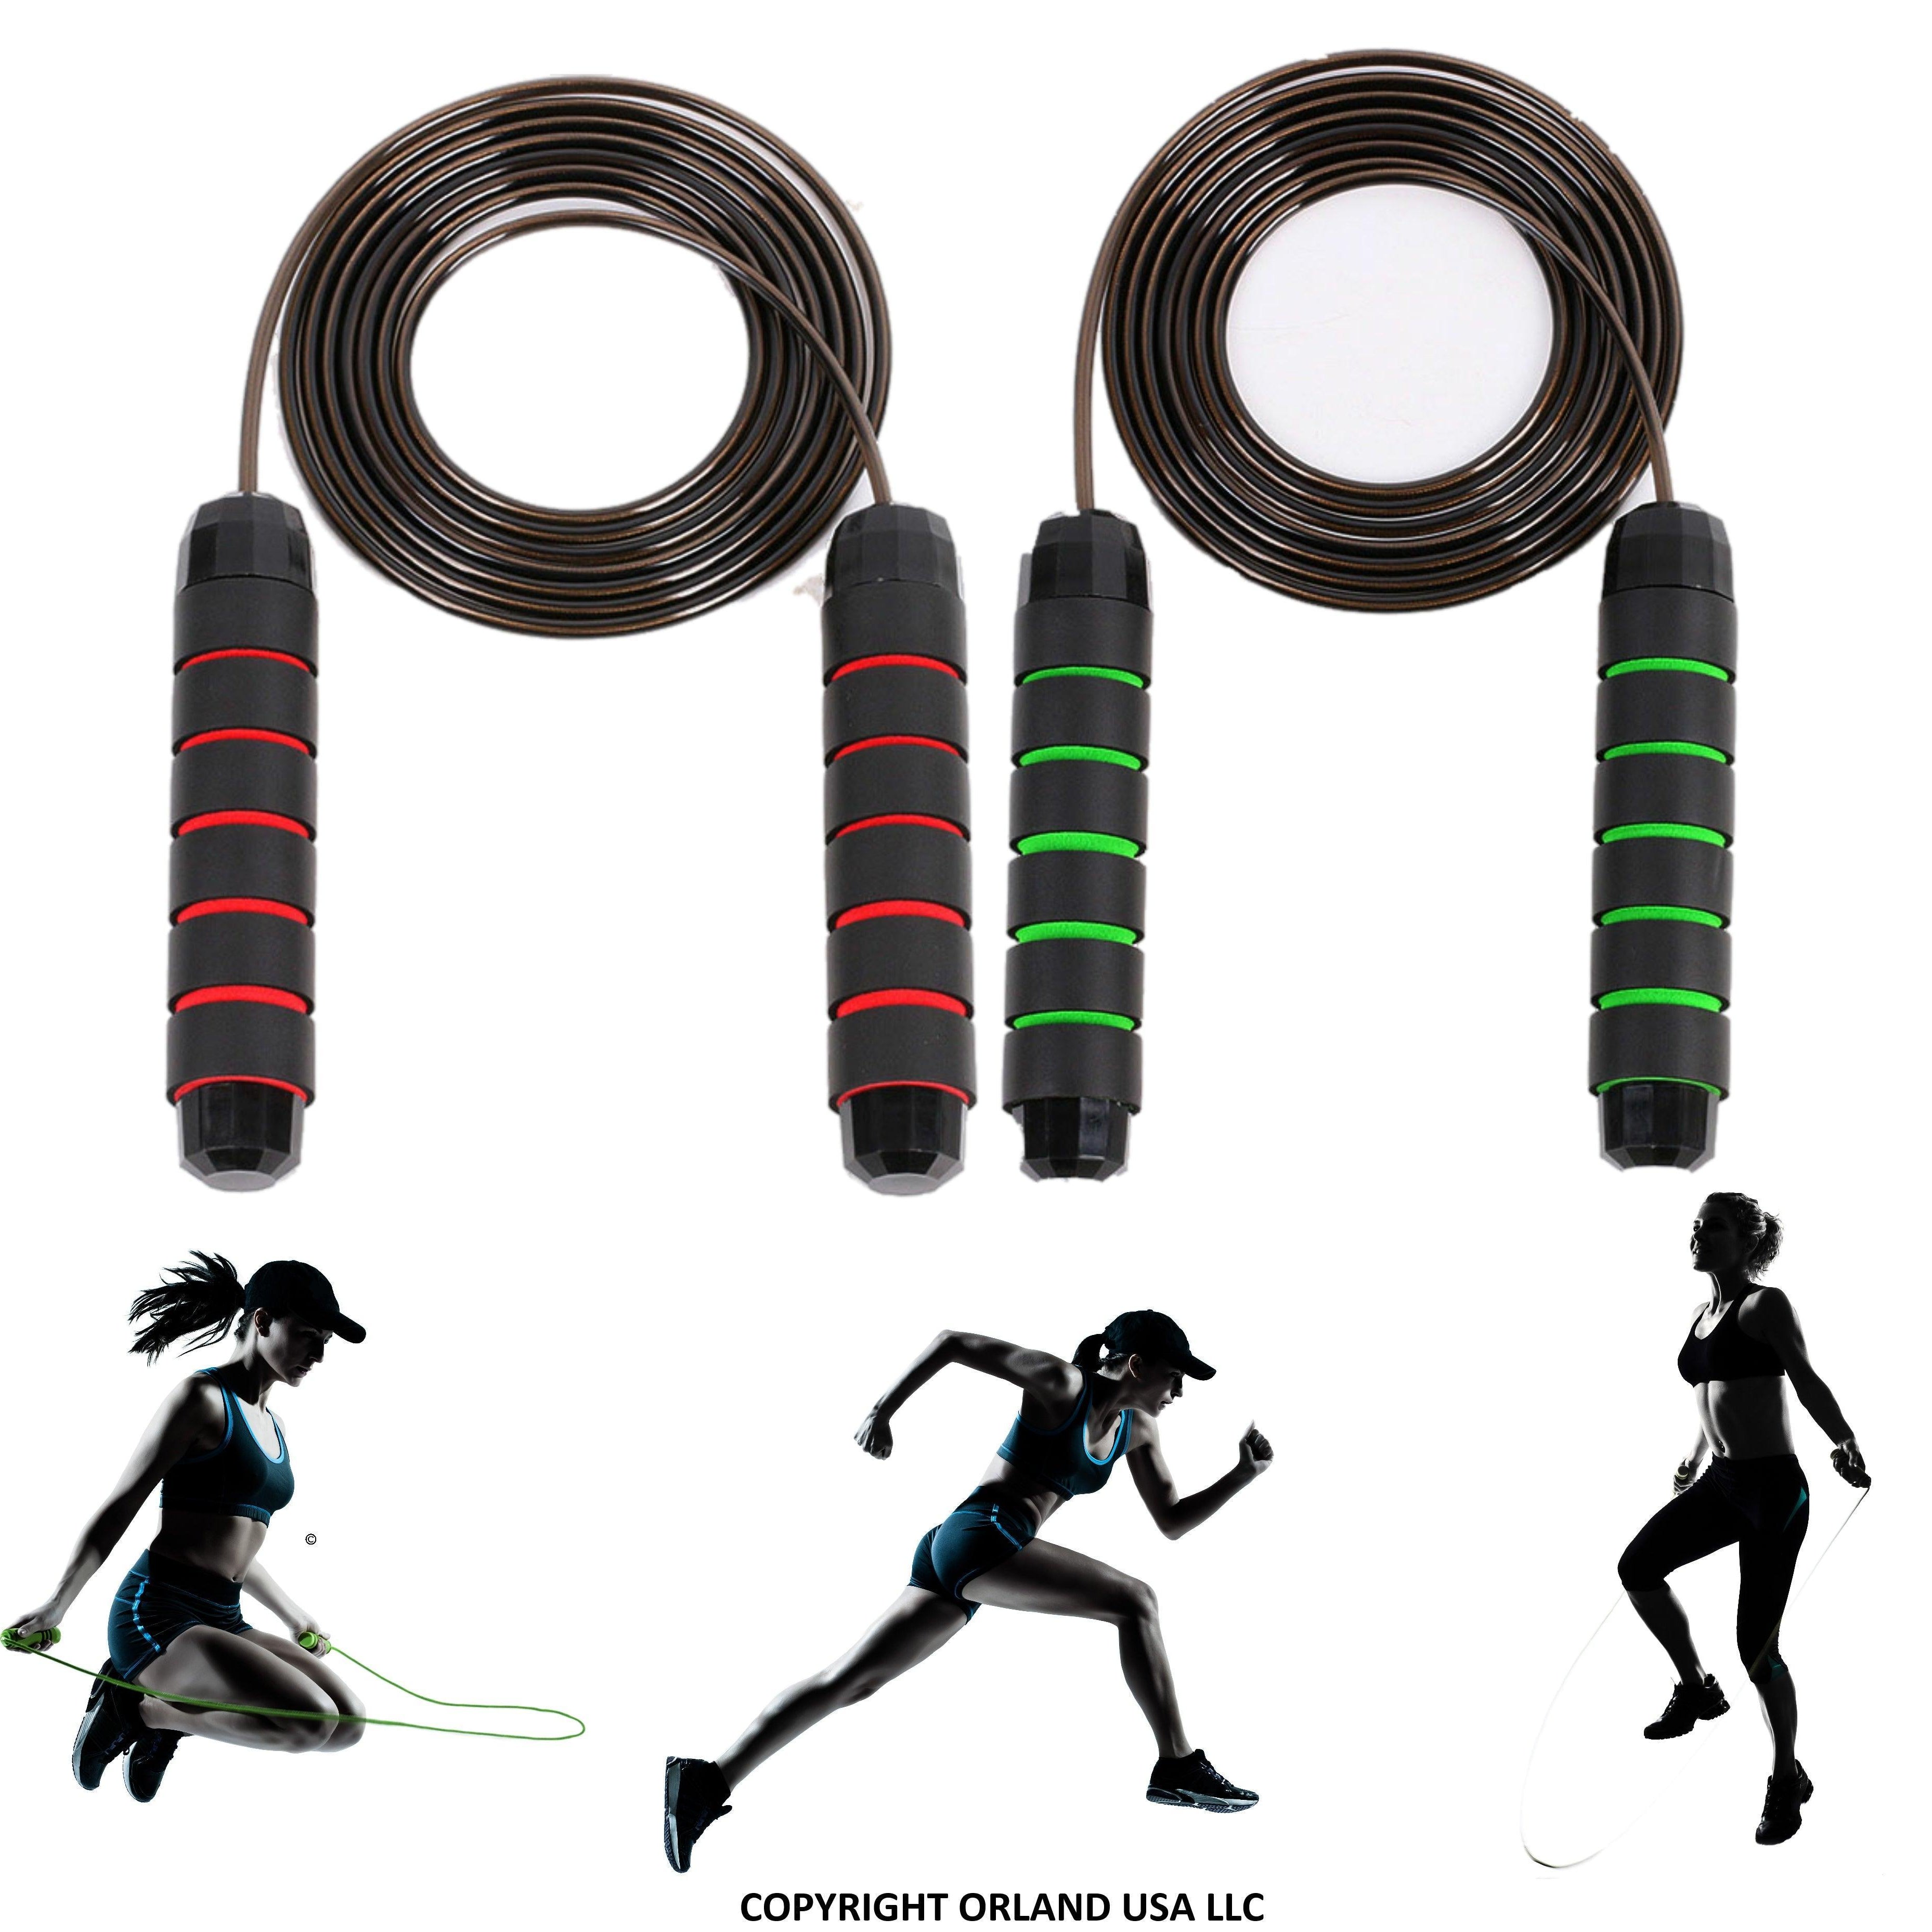 Fitness & Health Jump Rope Skipping Aerobic Exercise Adjustable Bearing Speed